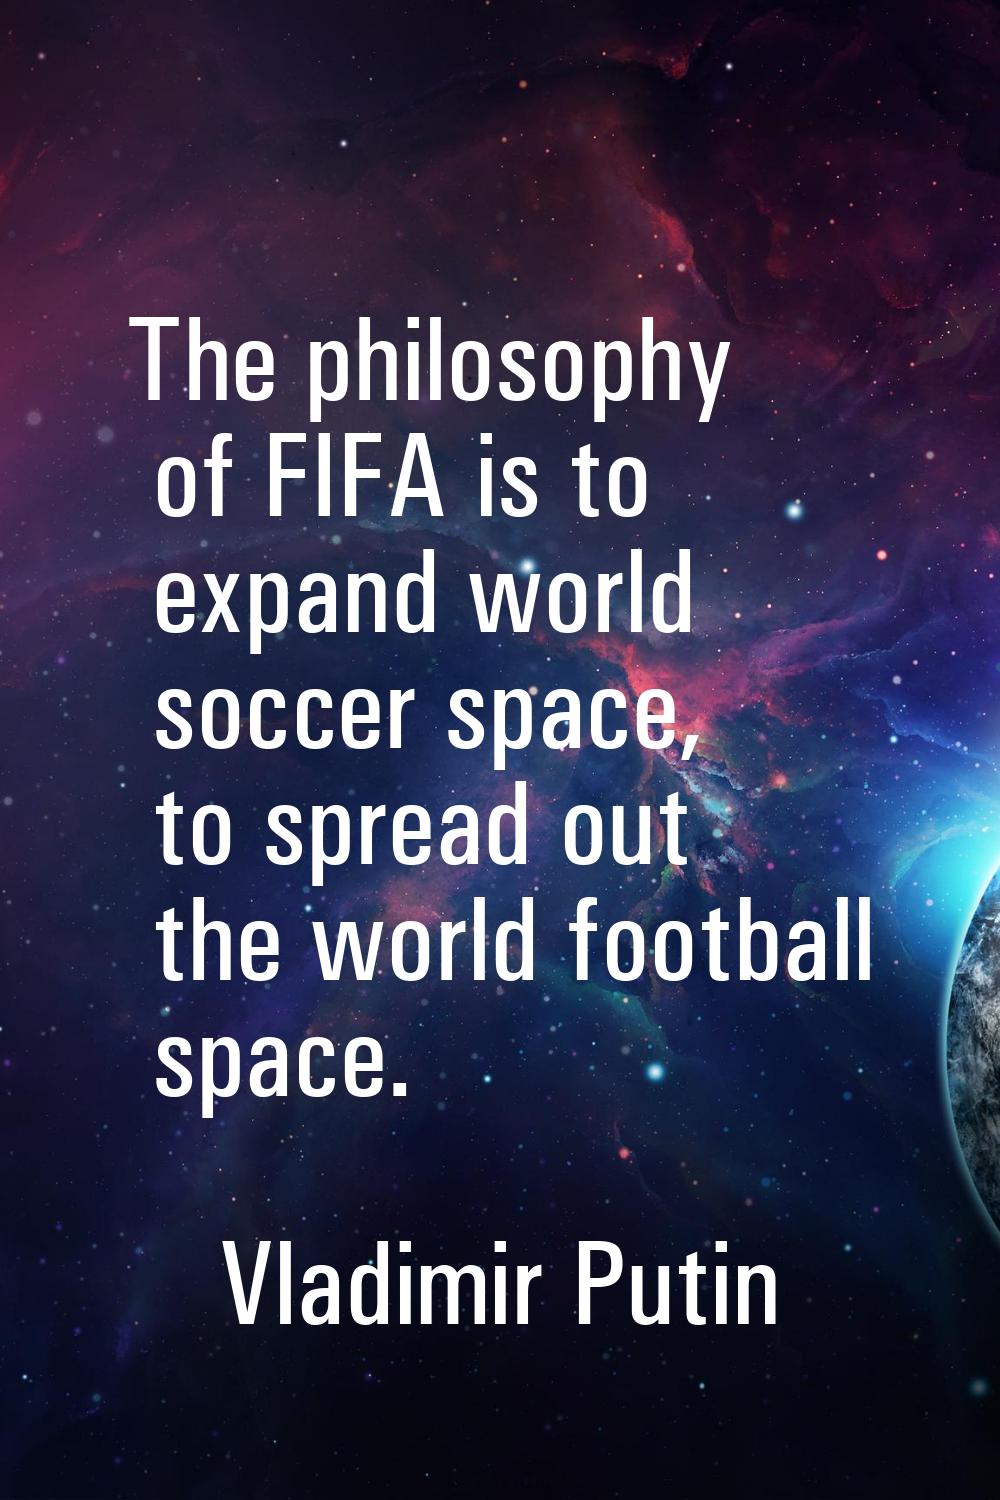 The philosophy of FIFA is to expand world soccer space, to spread out the world football space.